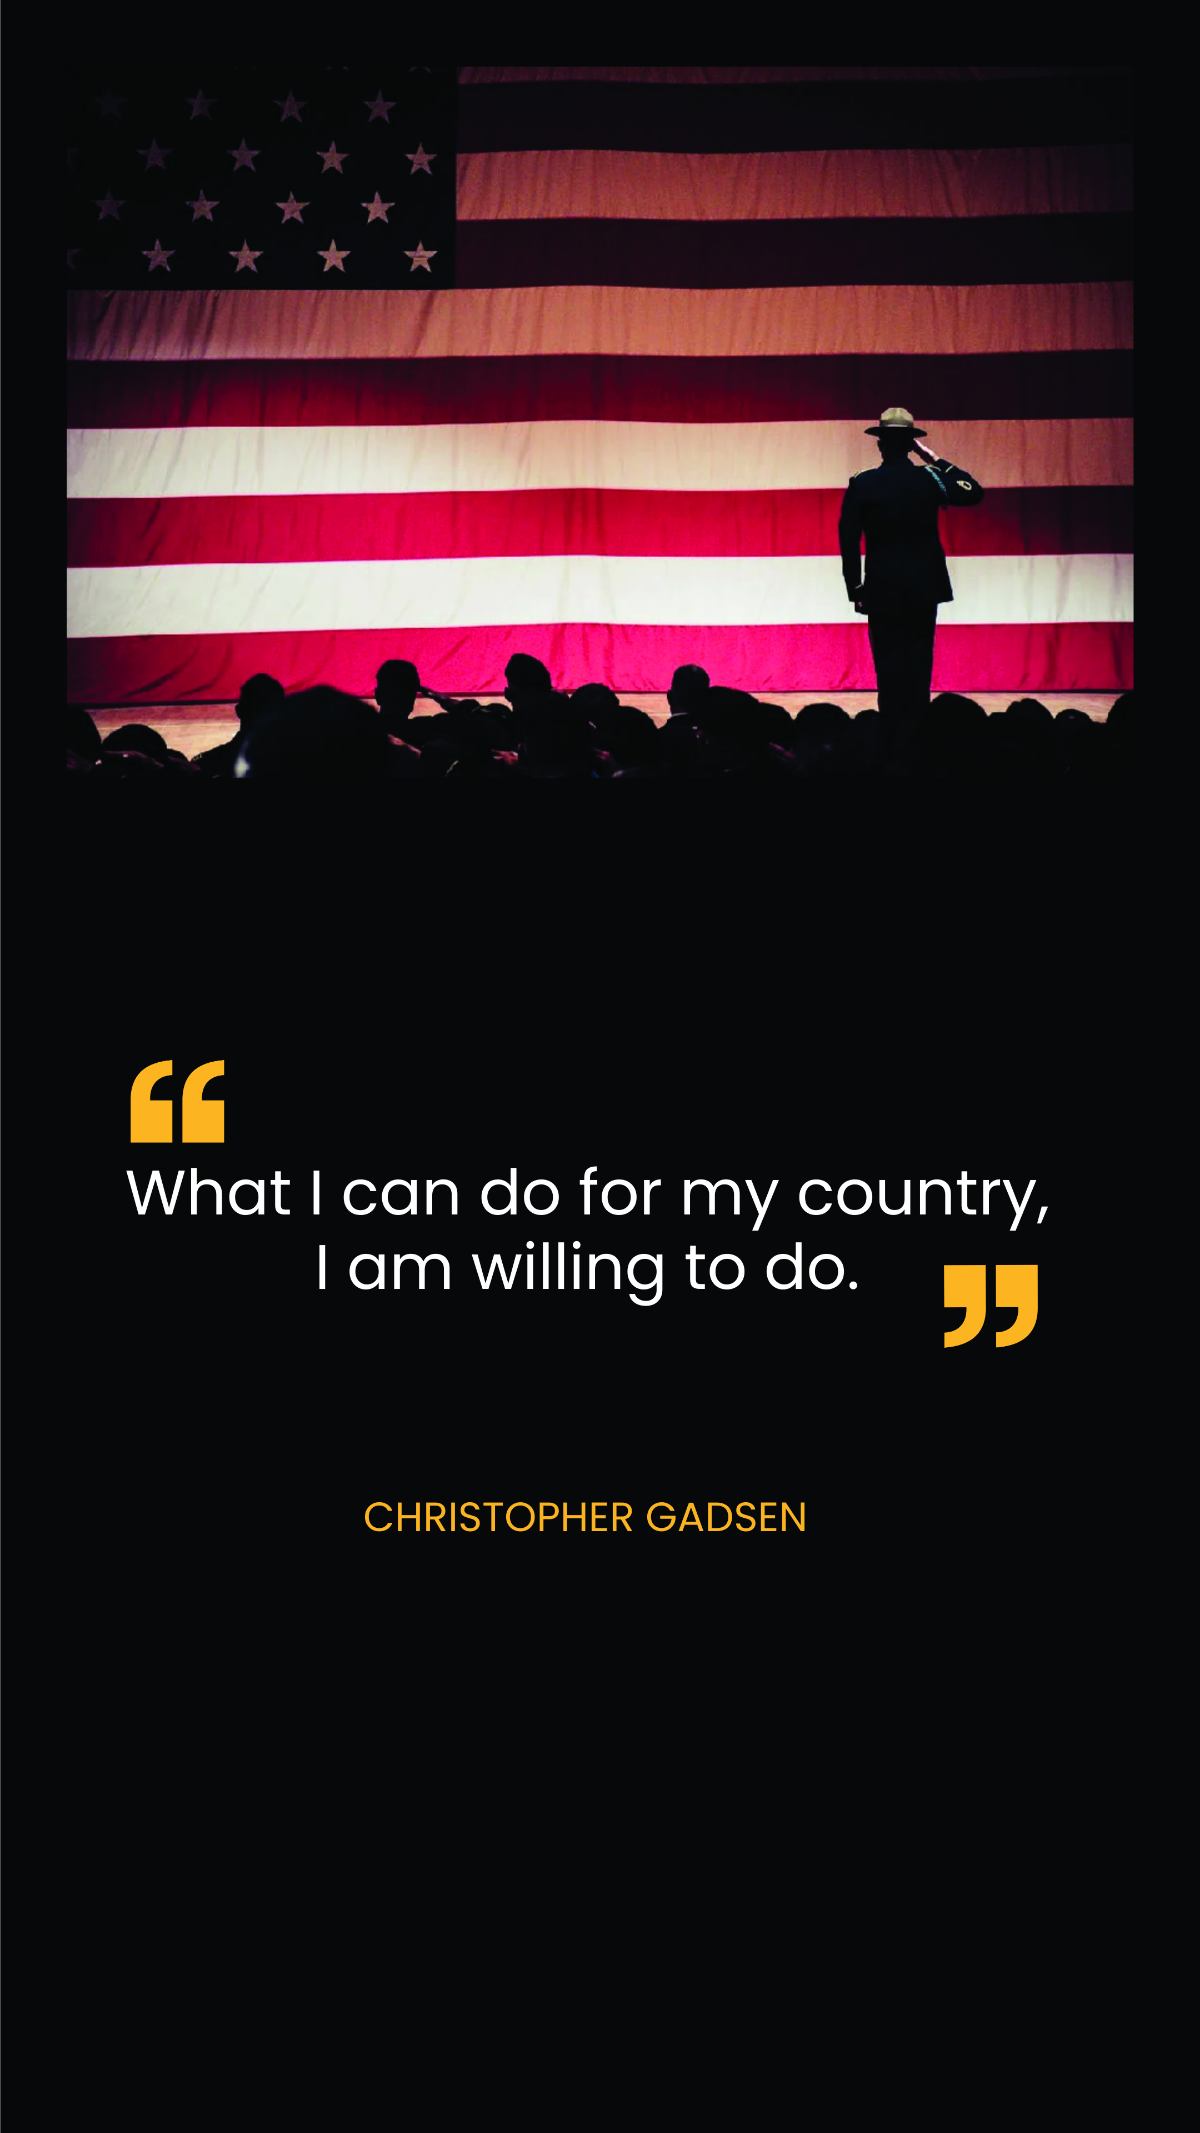 Christopher Gadsden - What I can do for my country, I am willing to do.  Template